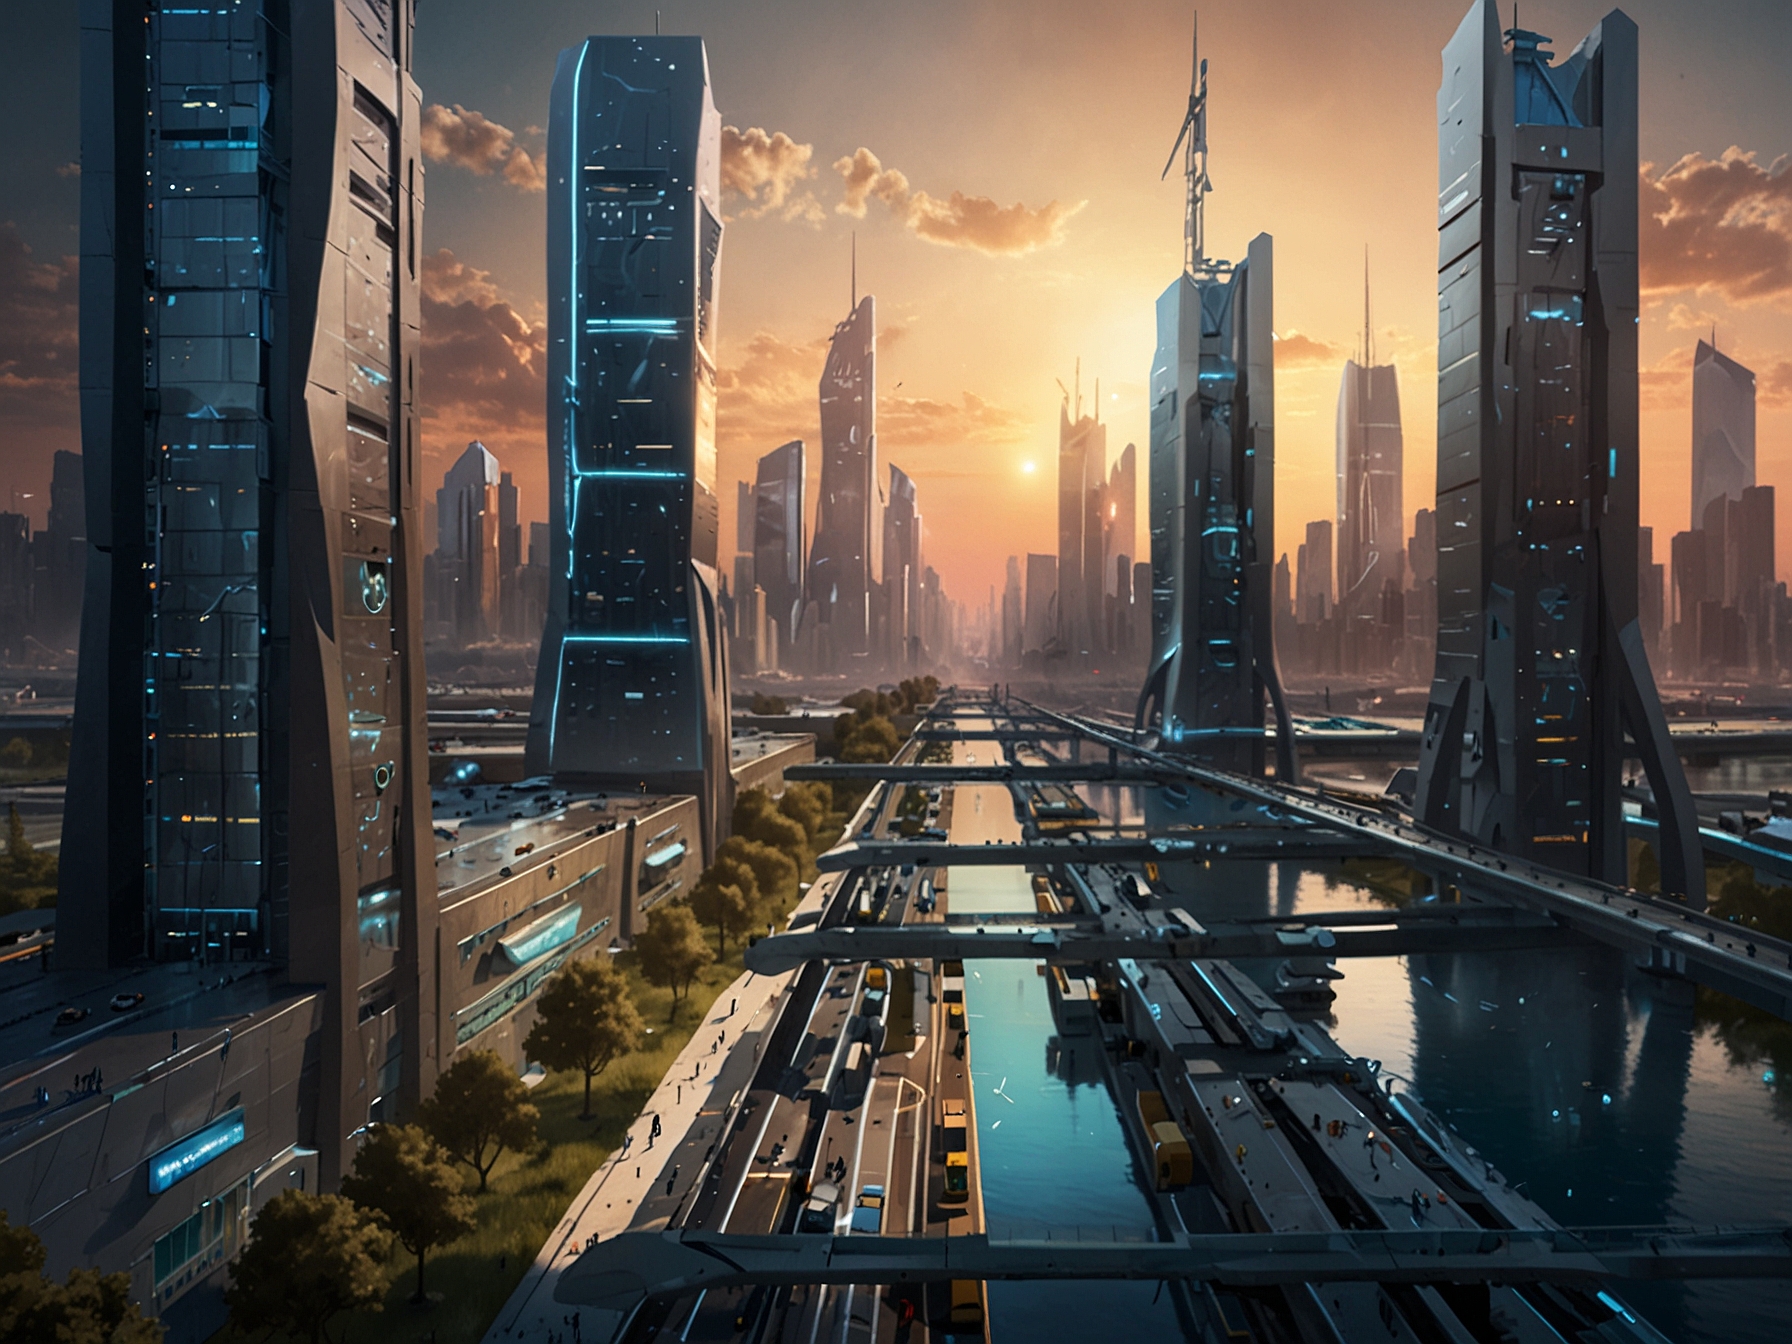 An illustration of a futuristic city with advanced hydrogen infrastructure, including refueling stations and supply chains, necessary for the wide adoption of hydrogen energy.